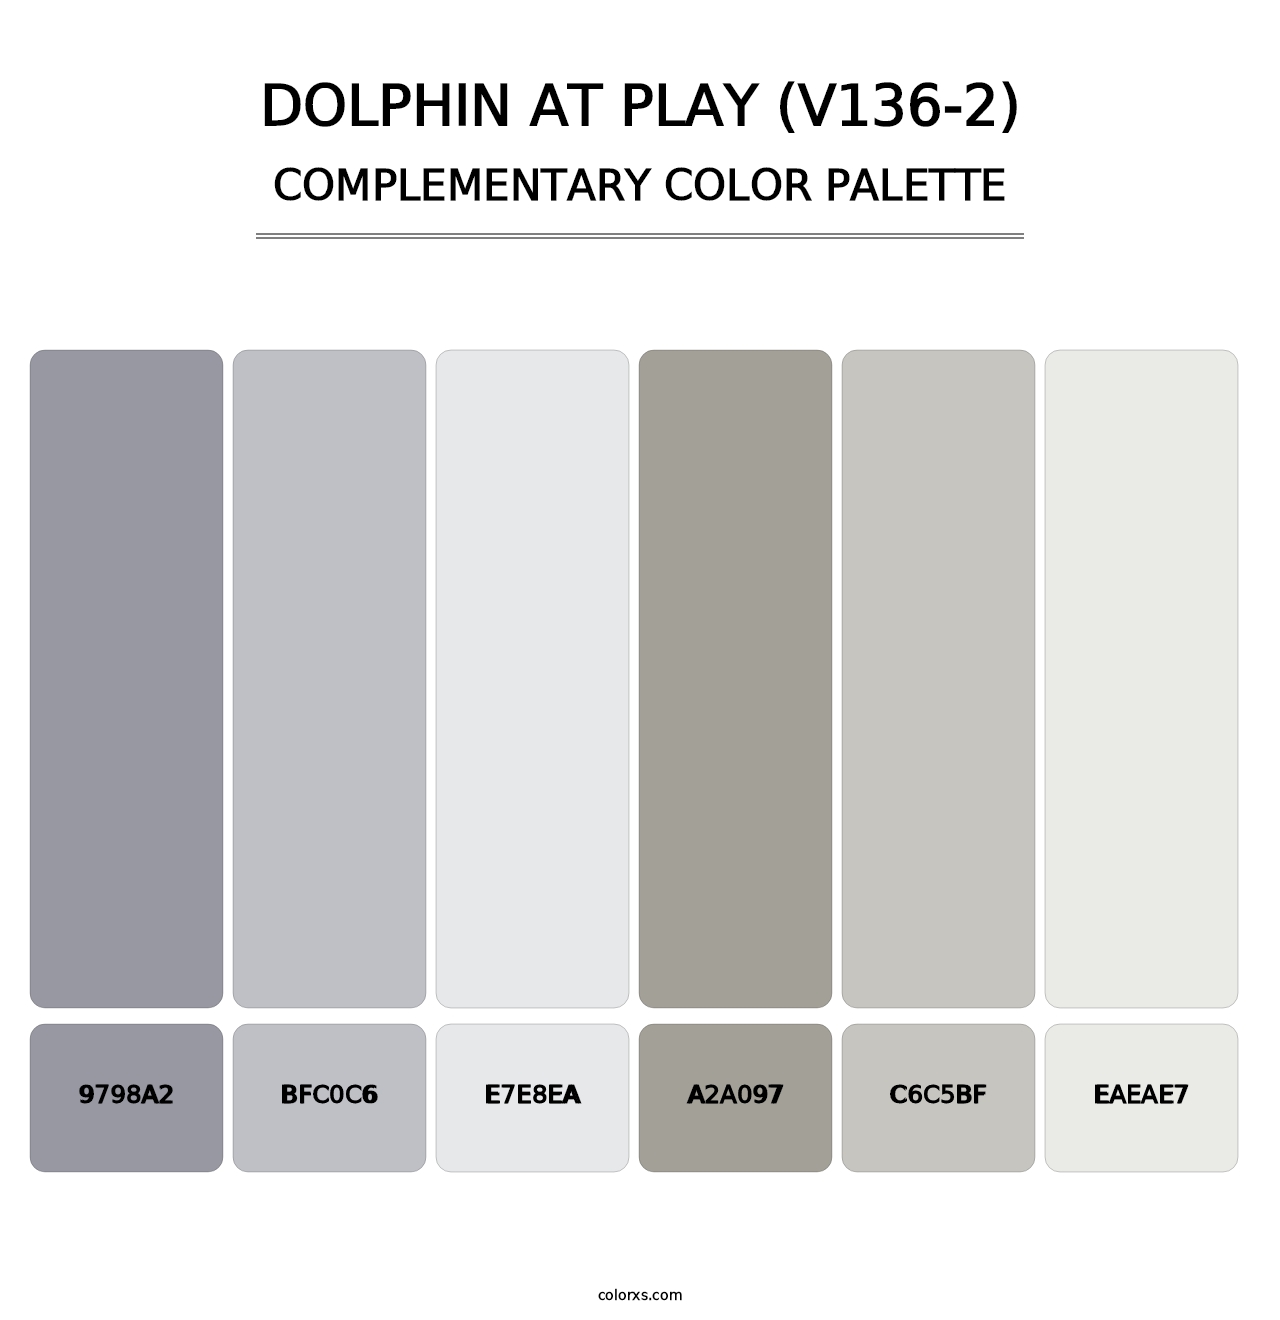 Dolphin at Play (V136-2) - Complementary Color Palette